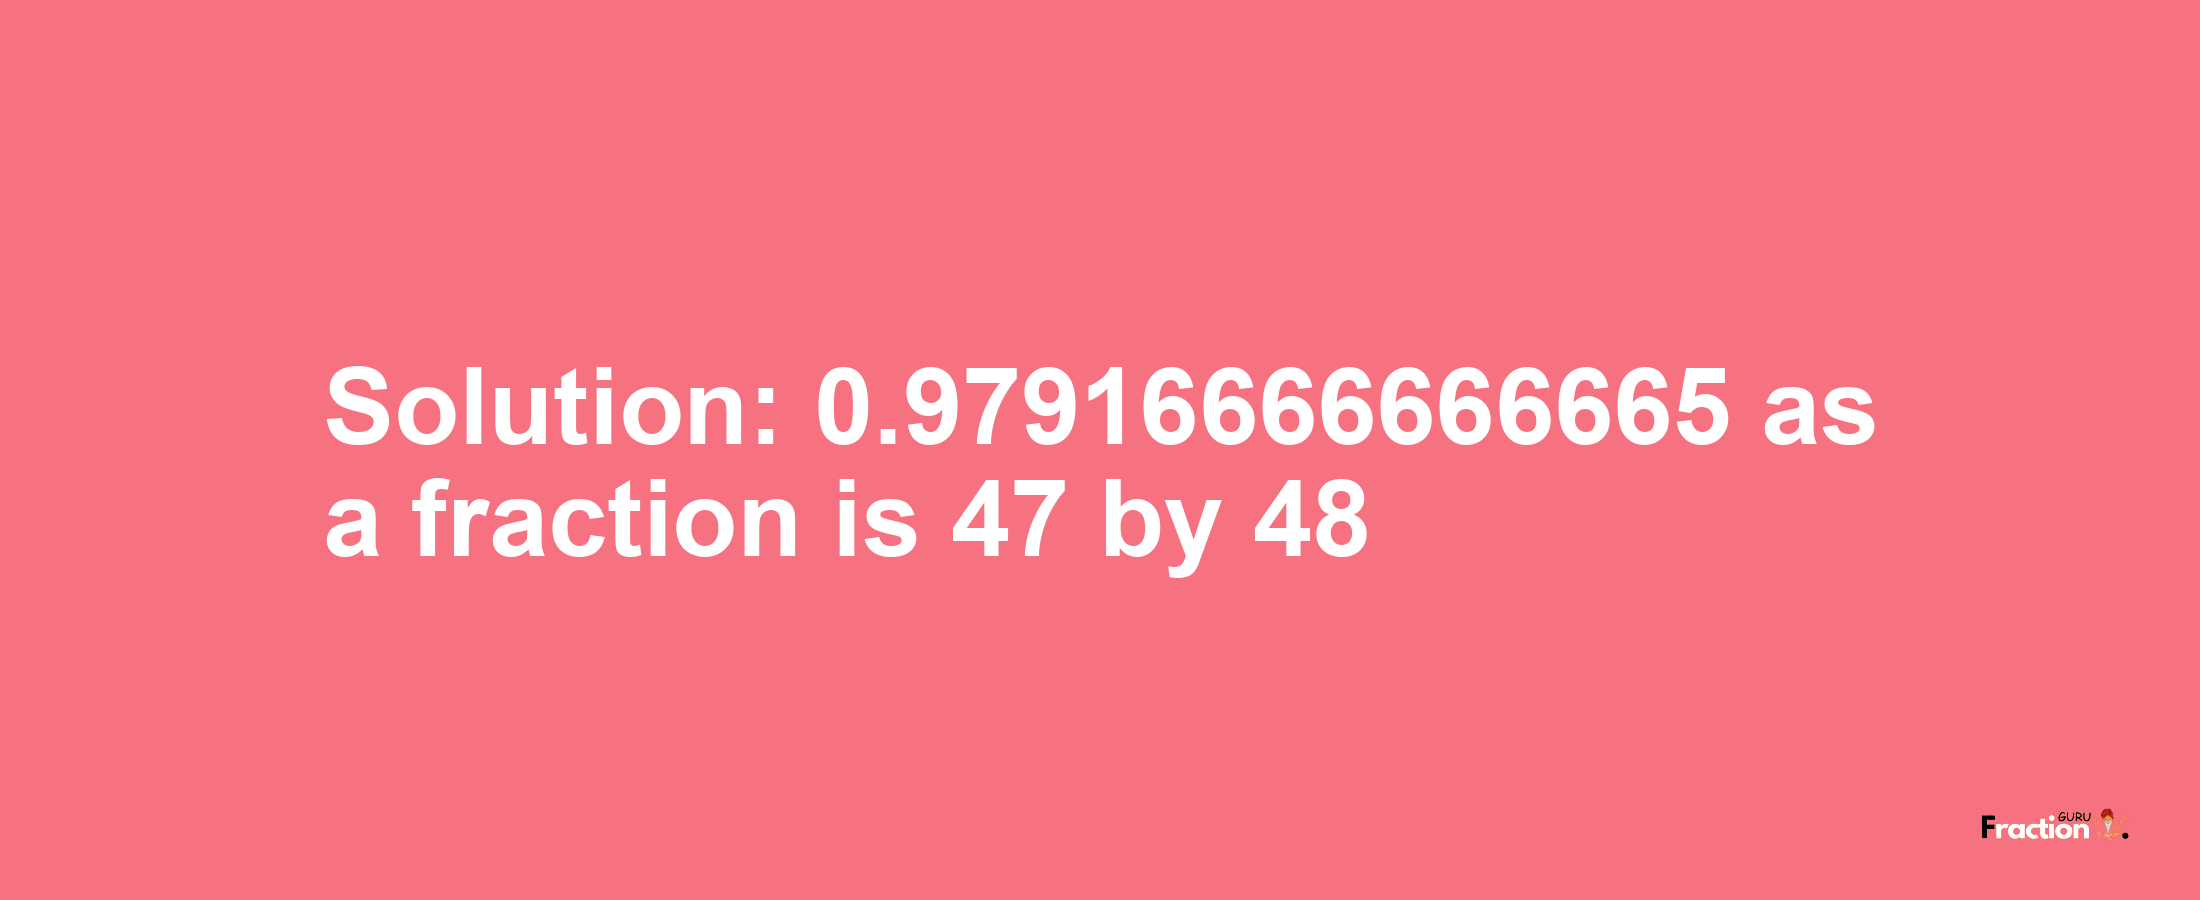 Solution:0.97916666666665 as a fraction is 47/48